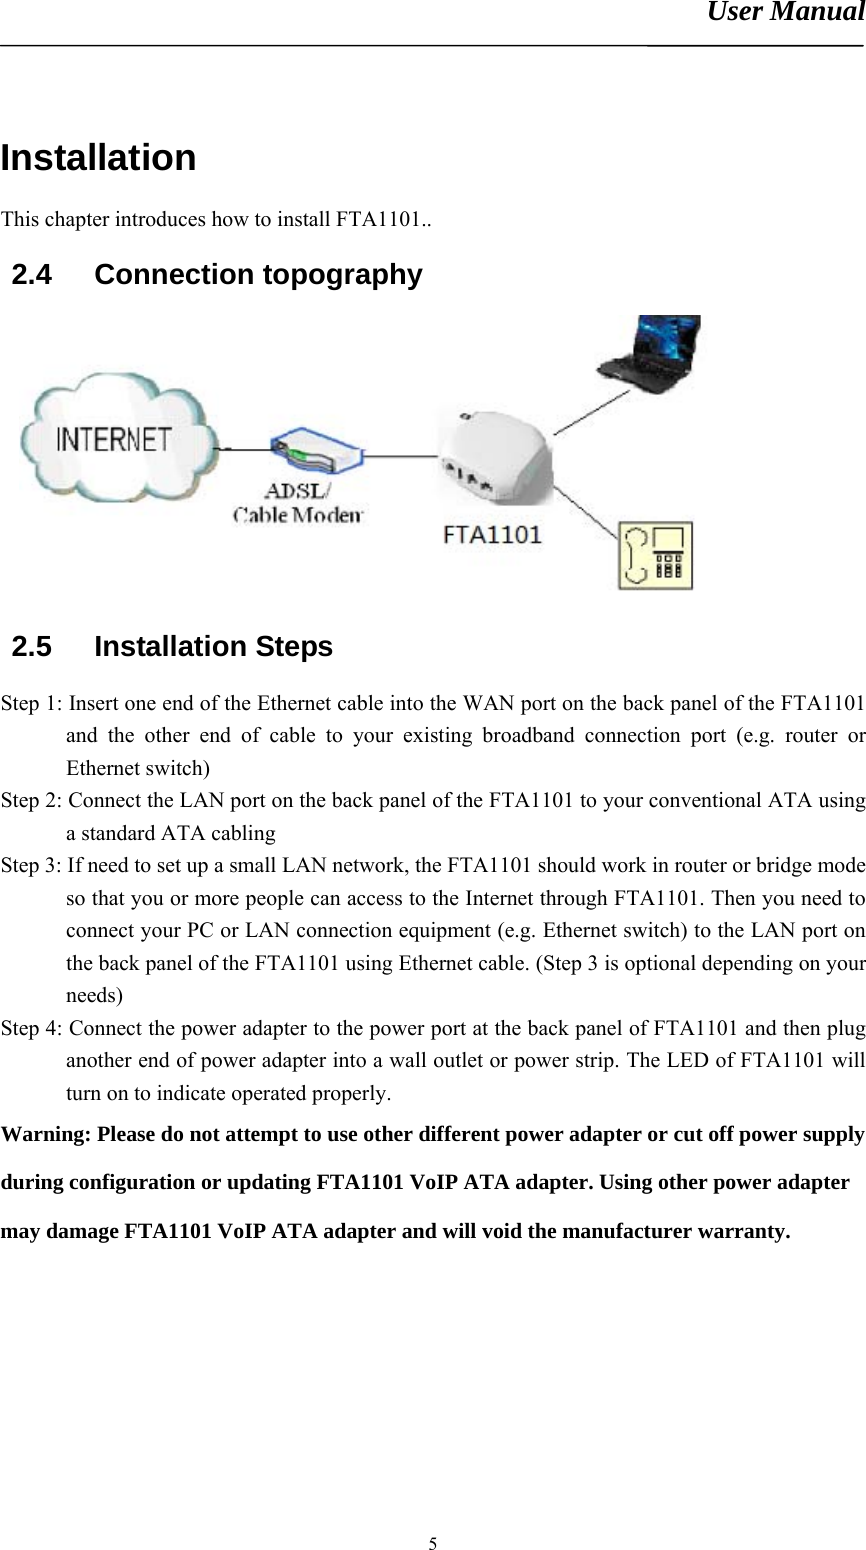 User Manual       5Installation This chapter introduces how to install FTA1101.. 2.4 Connection topography  2.5 Installation Steps Step 1: Insert one end of the Ethernet cable into the WAN port on the back panel of the FTA1101 and the other end of cable to your existing broadband connection port (e.g. router or Ethernet switch) Step 2: Connect the LAN port on the back panel of the FTA1101 to your conventional ATA using a standard ATA cabling   Step 3: If need to set up a small LAN network, the FTA1101 should work in router or bridge mode so that you or more people can access to the Internet through FTA1101. Then you need to connect your PC or LAN connection equipment (e.g. Ethernet switch) to the LAN port on the back panel of the FTA1101 using Ethernet cable. (Step 3 is optional depending on your needs) Step 4: Connect the power adapter to the power port at the back panel of FTA1101 and then plug another end of power adapter into a wall outlet or power strip. The LED of FTA1101 will turn on to indicate operated properly. Warning: Please do not attempt to use other different power adapter or cut off power supply during configuration or updating FTA1101 VoIP ATA adapter. Using other power adapter may damage FTA1101 VoIP ATA adapter and will void the manufacturer warranty. 